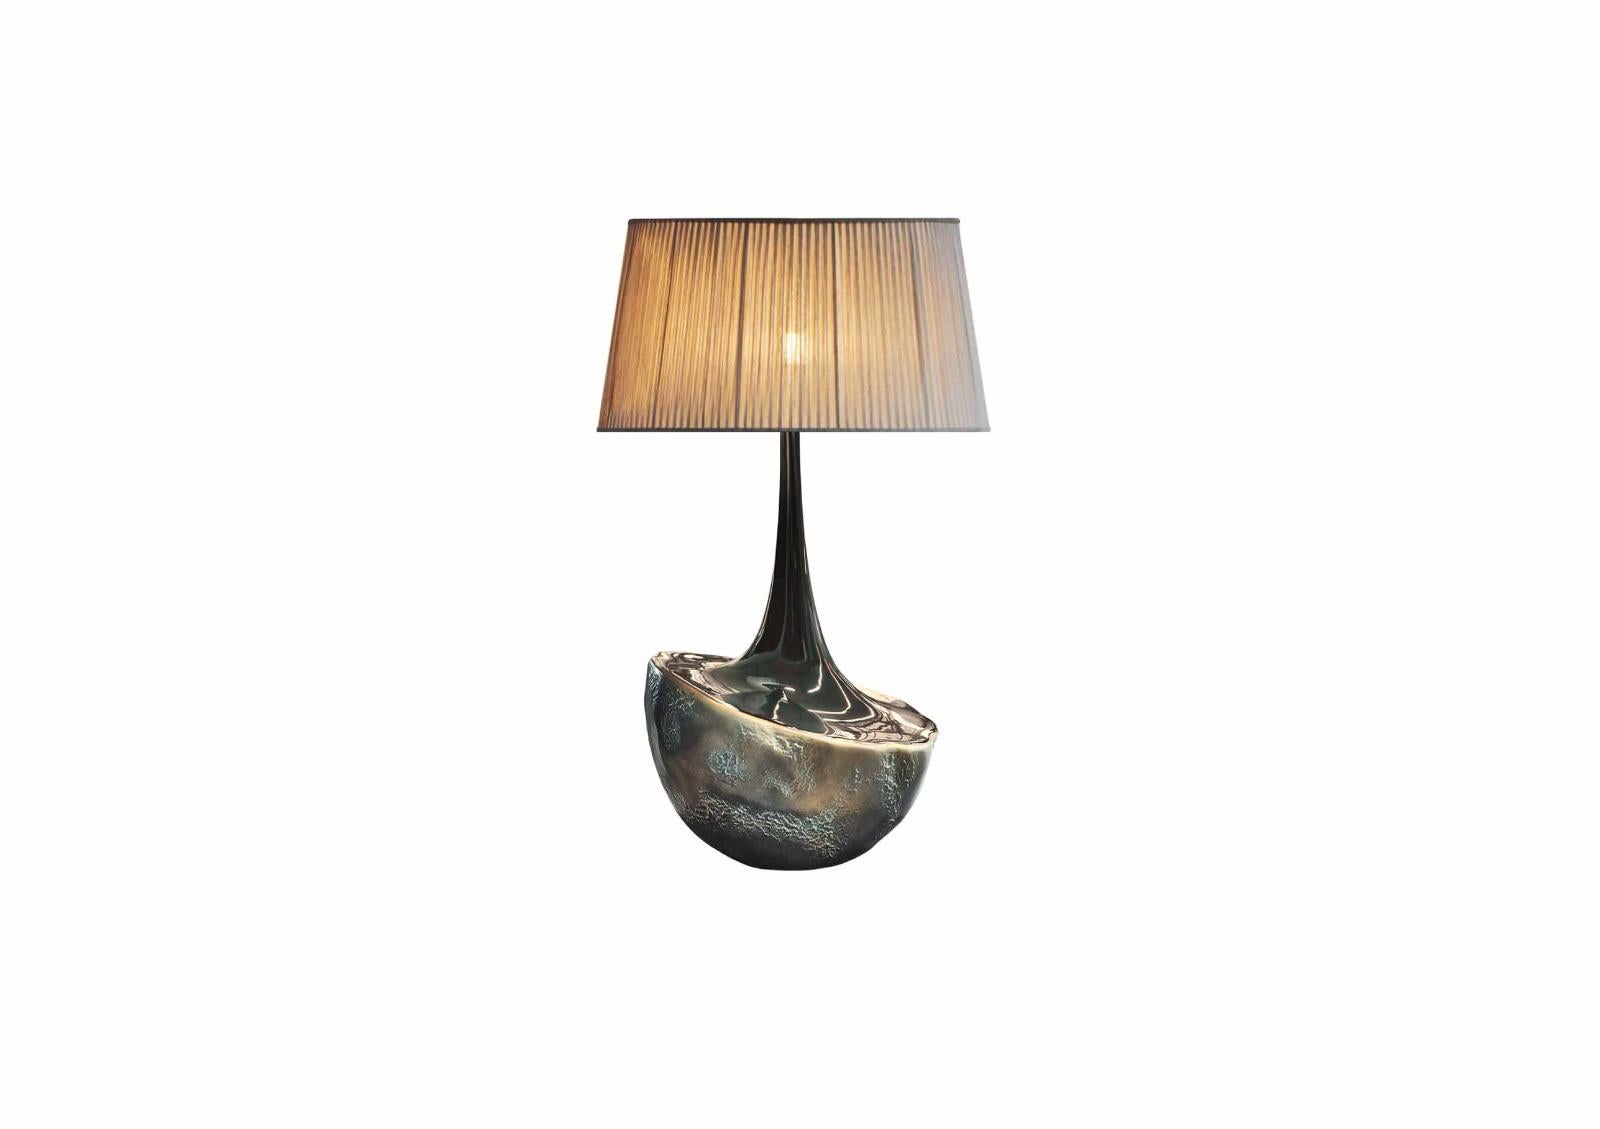 Table lamp

General information
Dimensions (cm): Ø60 x 100
Dimensions (in): Ø23.6 x 39.4
Weight (kg): 9.5
Weight (lbs): 20.9

Materials and colors
Lampshade: Pleated fabric Vitória ref. 